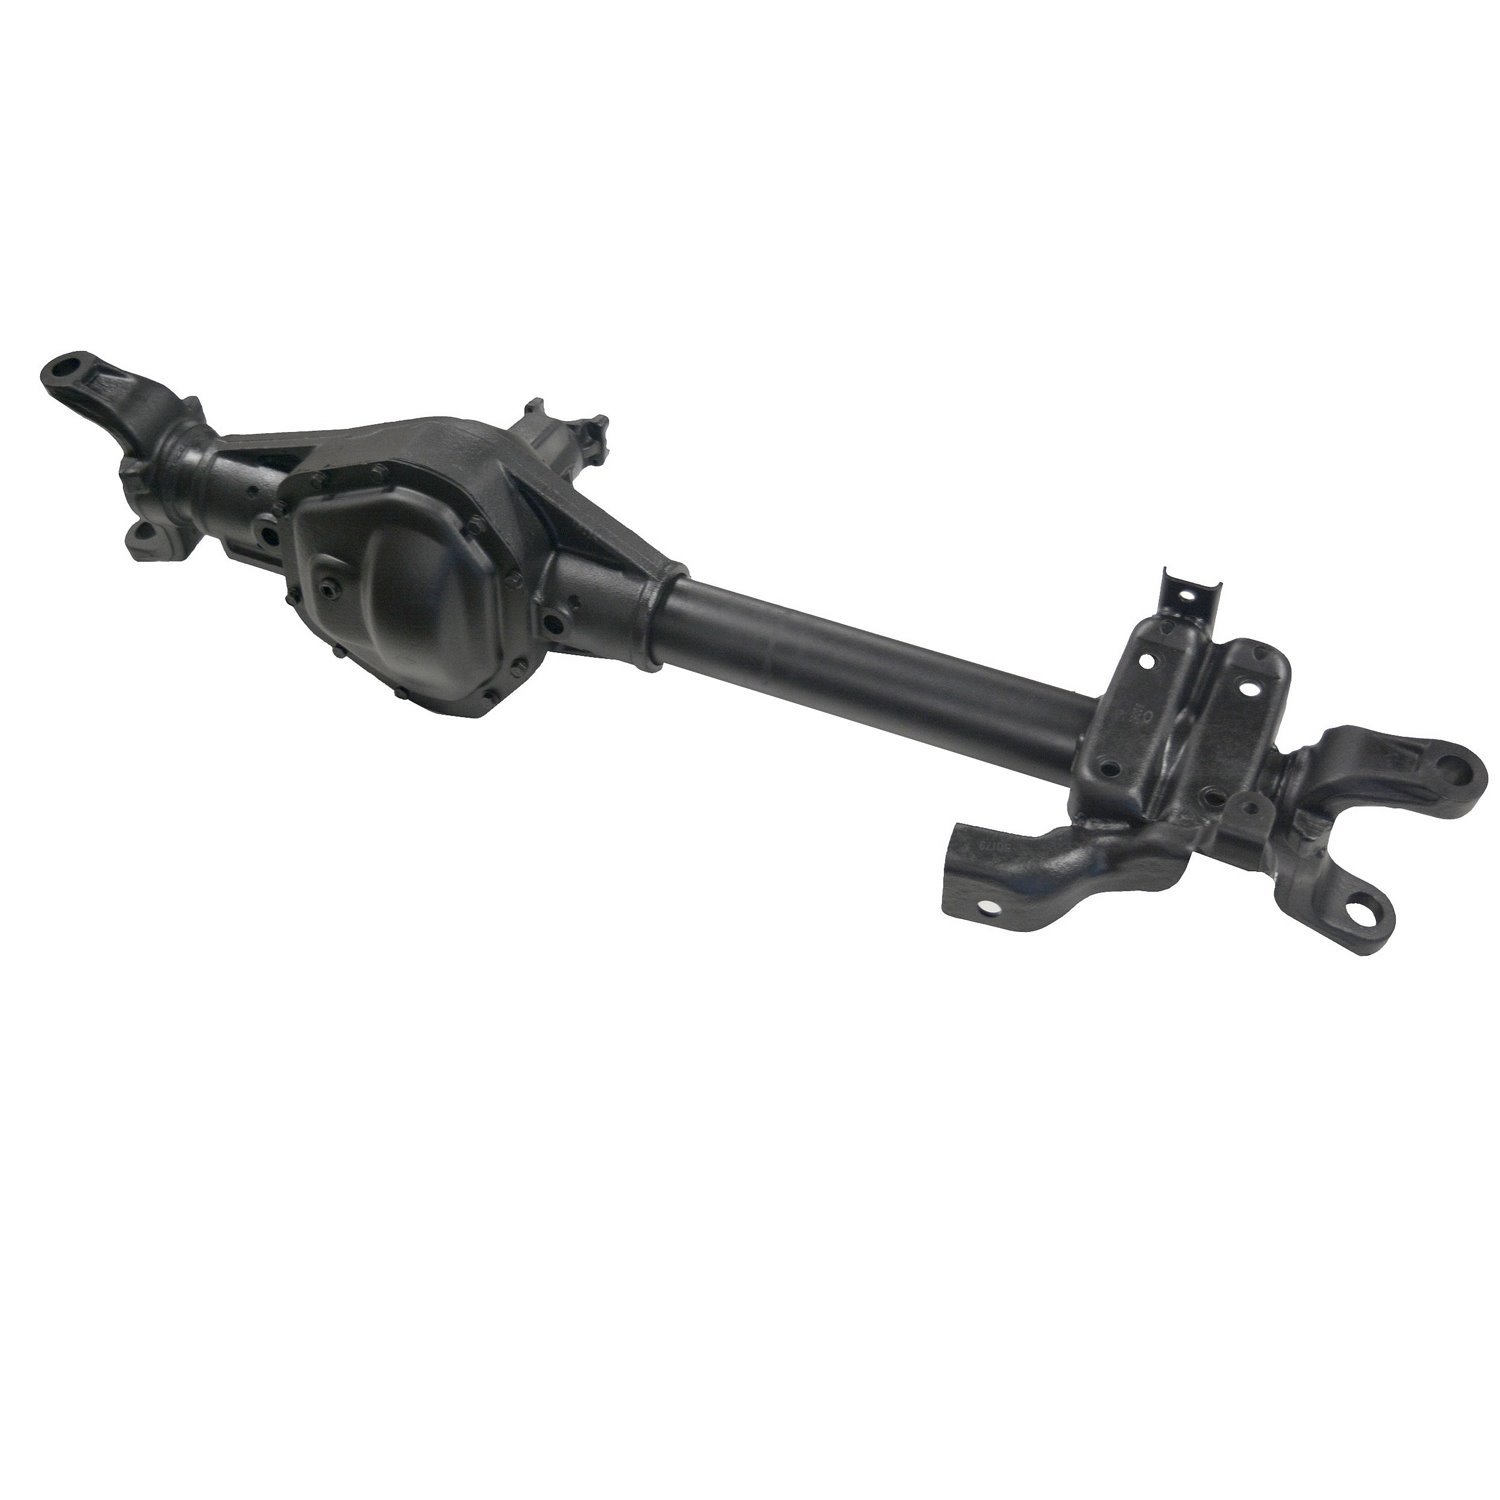 Remanufactured Complete Axle Assy for Dana 50 1999 F250 & F350 3.73 , SRW, 4 Wheel ABS